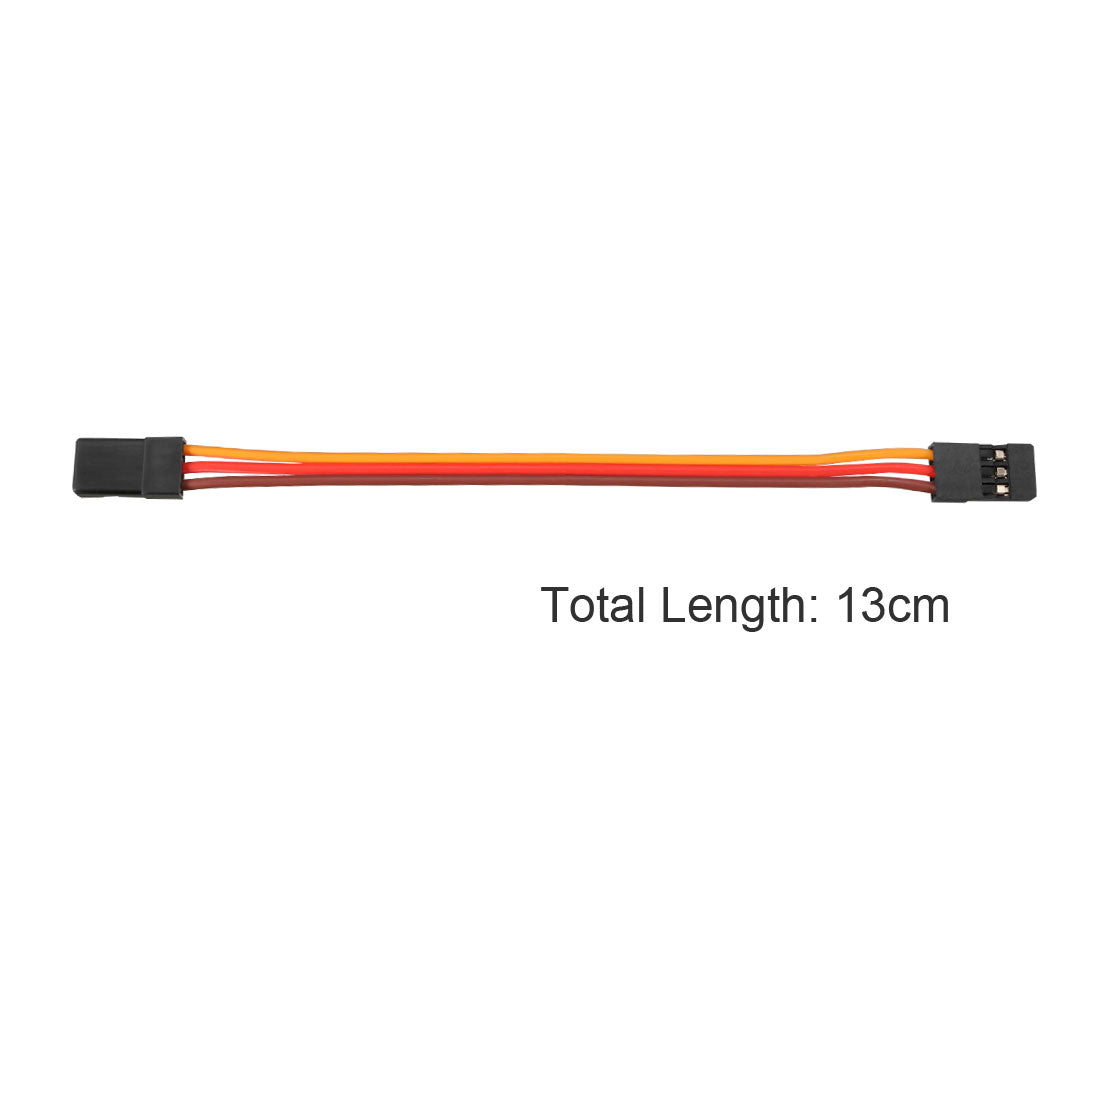 uxcell Uxcell 5Pcs 4 Inches 100mm 3-pin Servo Extension Wire for RC Futaba Lock